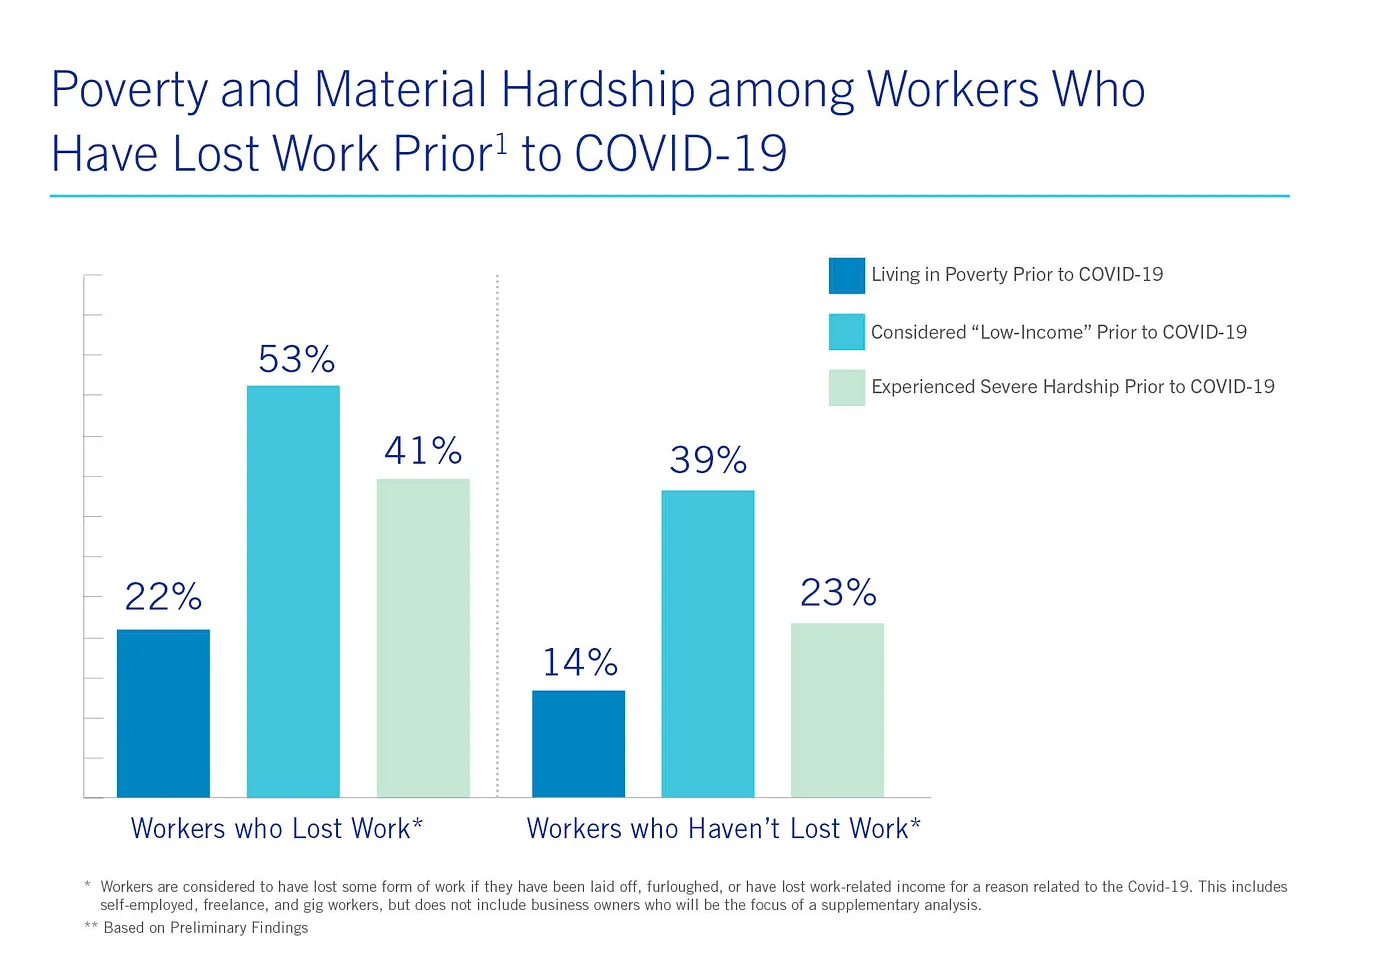 A graph that shows poverty and material hardship among workers who lost work prior to COVID-19